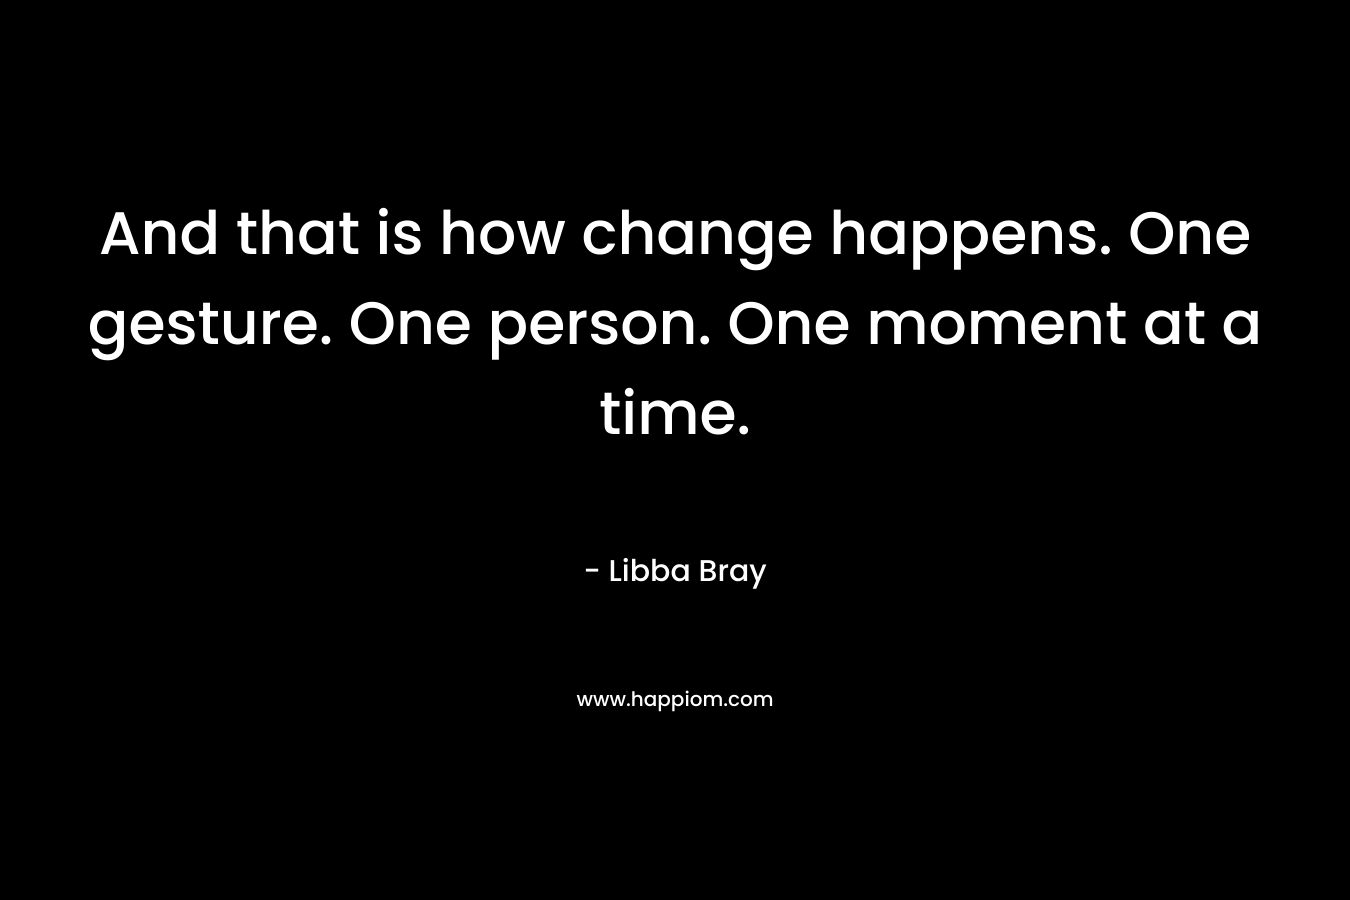 And that is how change happens. One gesture. One person. One moment at a time.